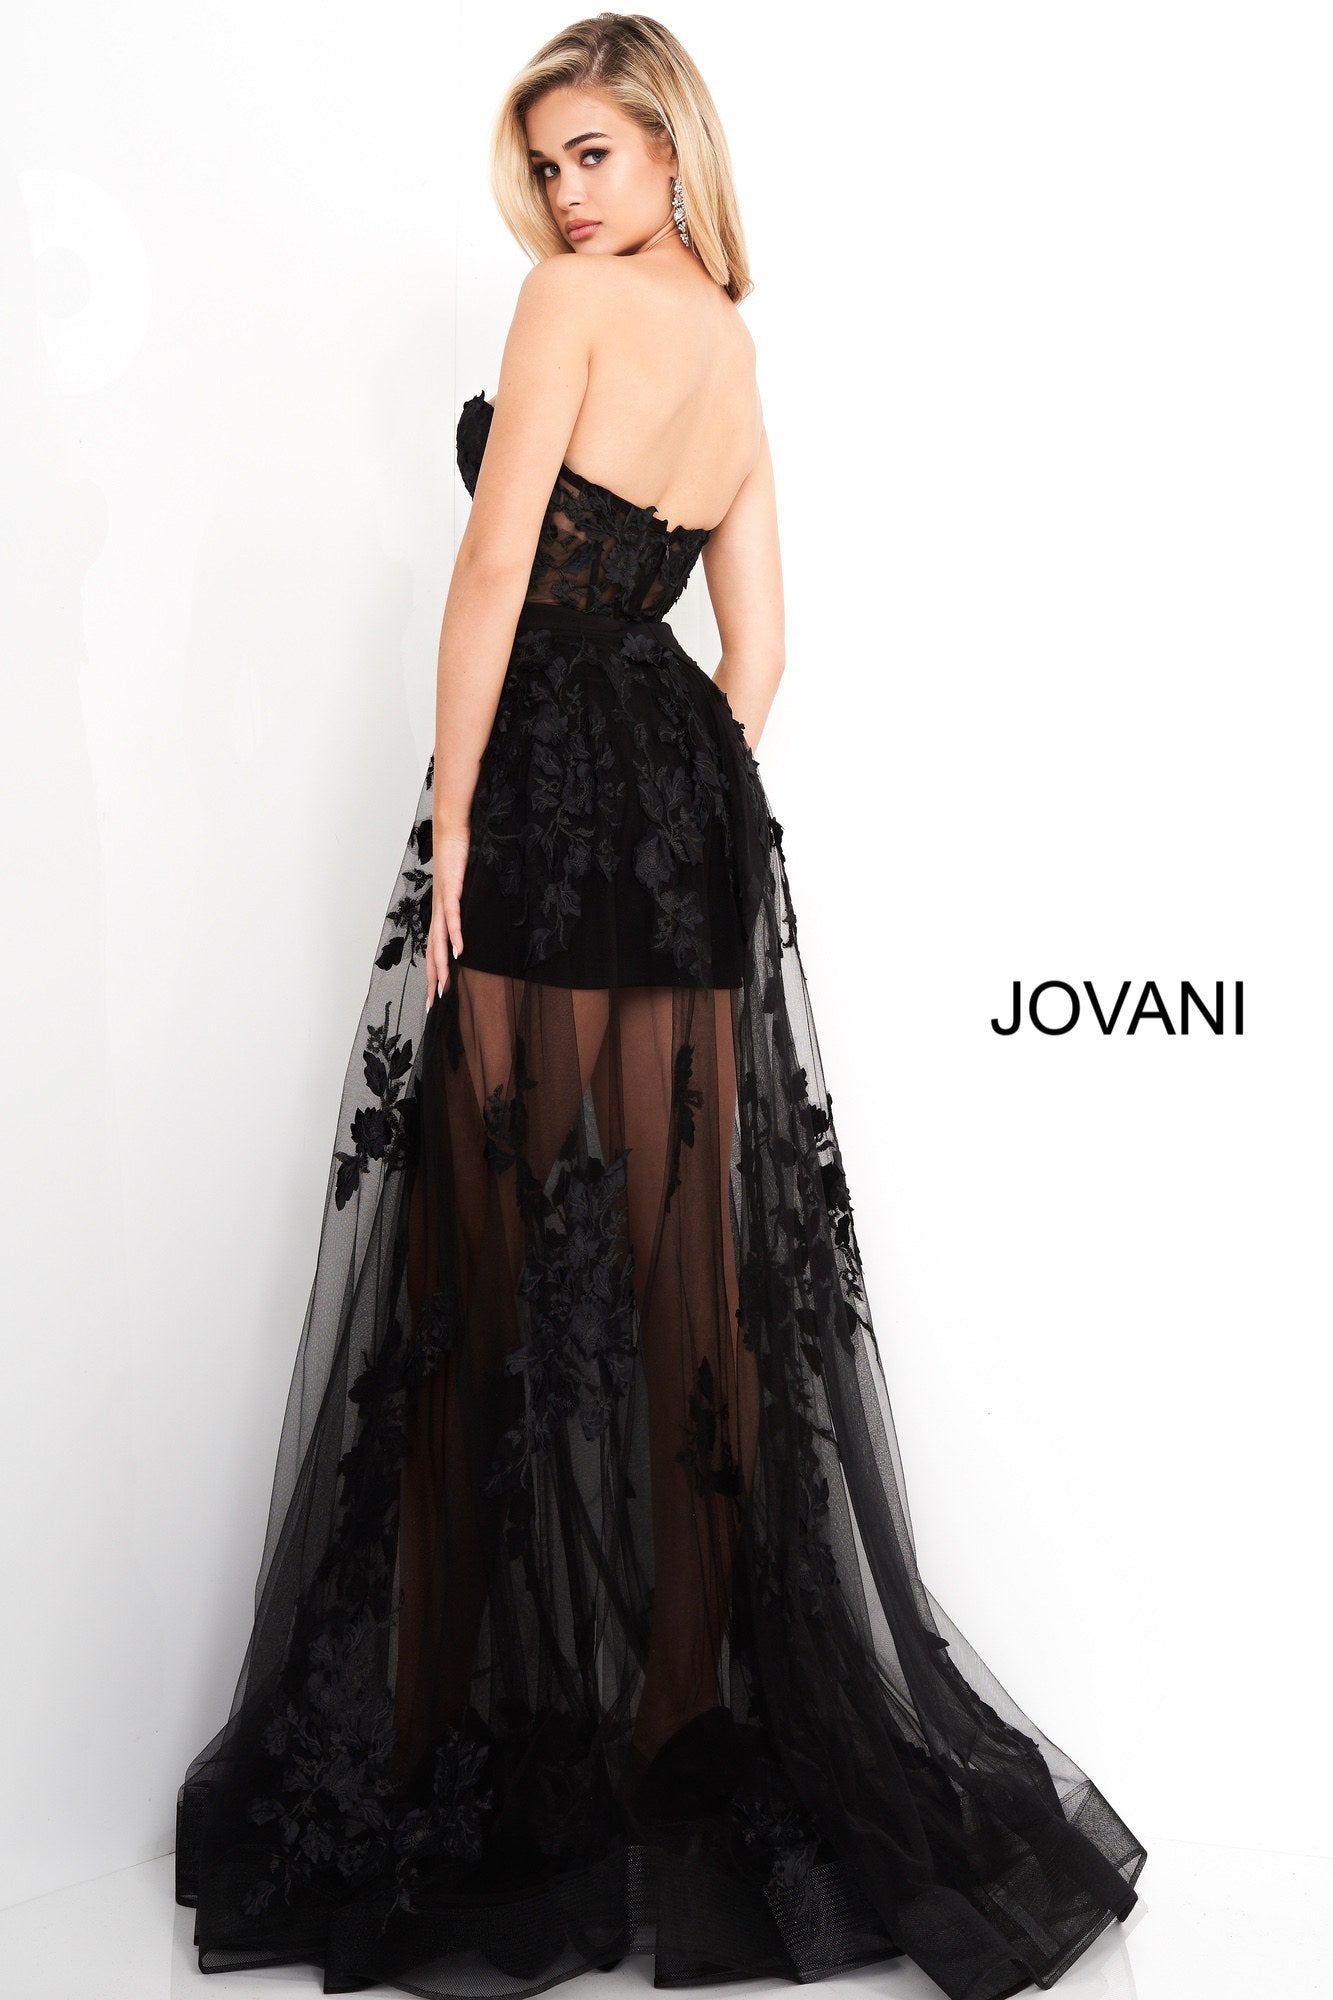 Jovani 02845 is a 2020 maxi prom dress with a mini skirt under skirt. Sheer lace Embellished floral appliques. Sheer Strapless corset bodice with boning. Sheer Corset Maxi Skirt Prom Dress Mini Lace Sexy Formal Gown 2020